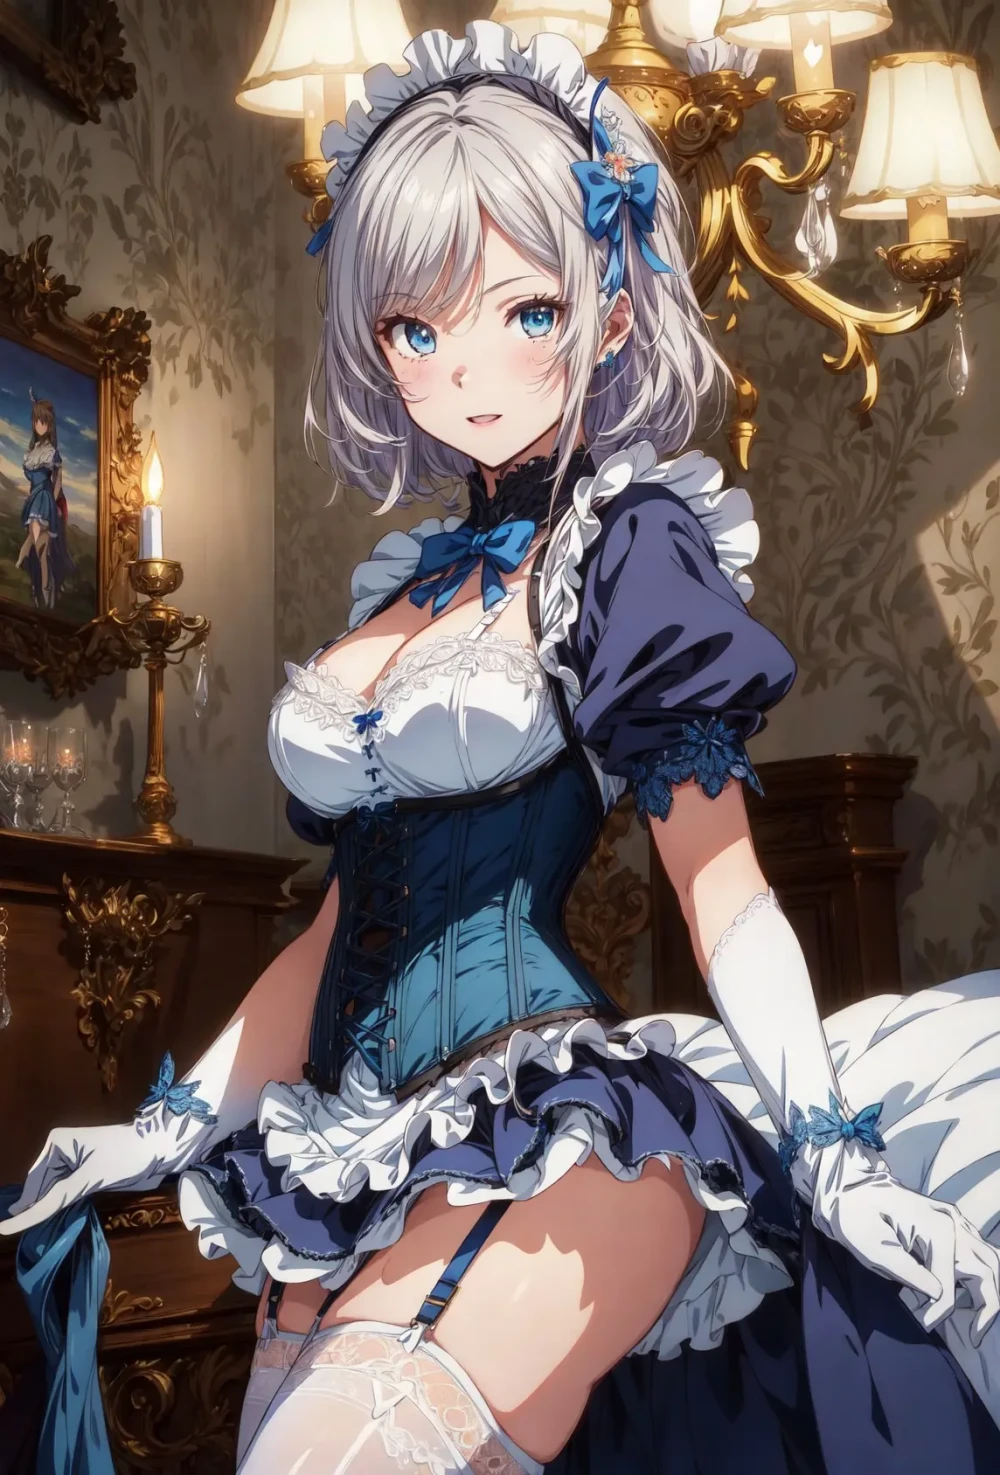 maid-anime-style-all-ages-35